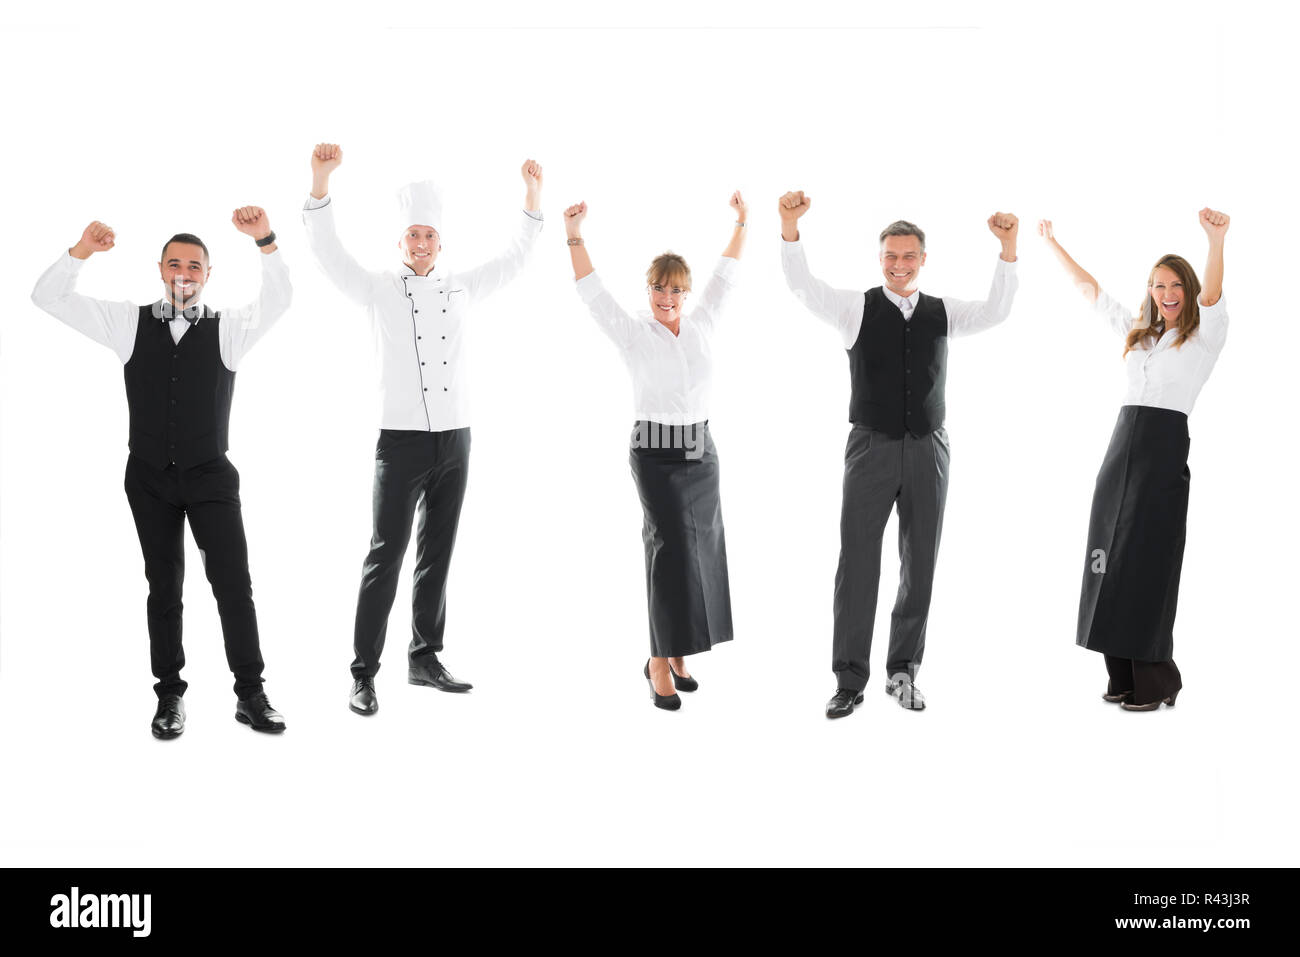 Happy Restaurant Staff Standing With Arms Raised Stock Photo